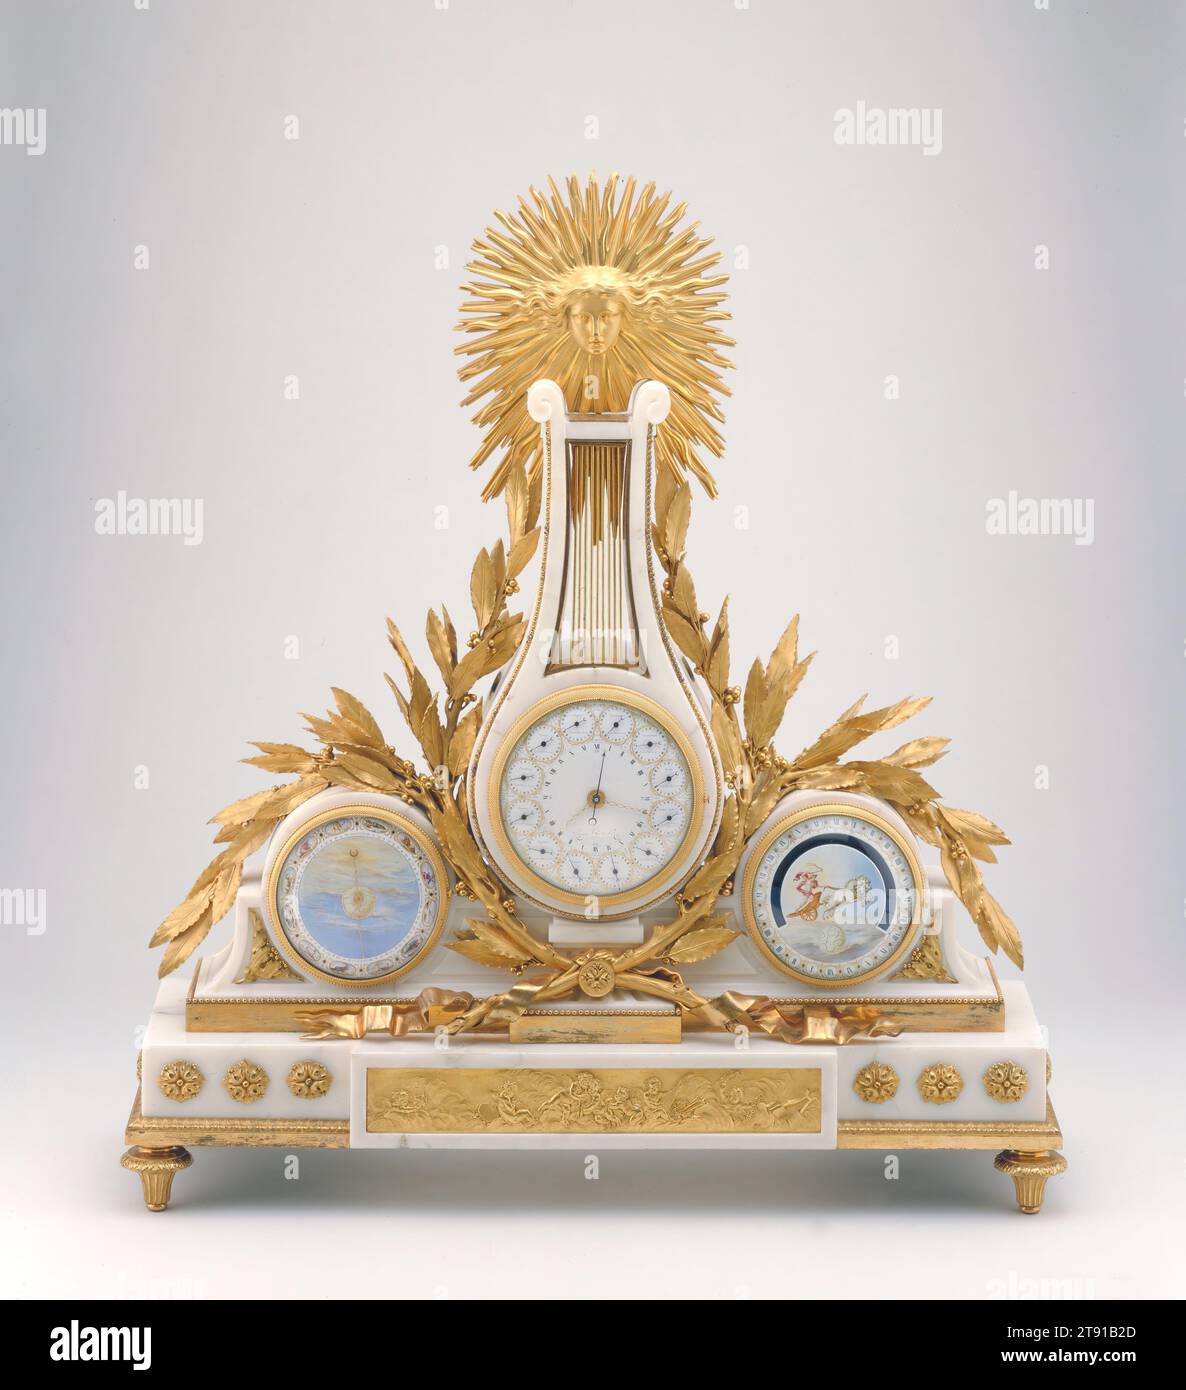 Clock, c. 1789, Jean-Antoine Lepine; Painter: Joseph Coteau, French, 1720–1814, 29 1/2 x 27 x 7 3/4 in. (74.93 x 68.58 x 19.69 cm), Marble, gilt bronze, France, 18th century, The multiple timekeeping functions of this clock make it one of the most ambitious objects ever designed by Jean-Antoine Lépine, clockmaker to King Louis XVI of France. The clock face features twelve secondary clocks that show the time in various cities around the world, from Boston to Batavia (present-day Jakarta, Indonesia). The dial on the left shows the position of the sun with respect to the constellations Stock Photo